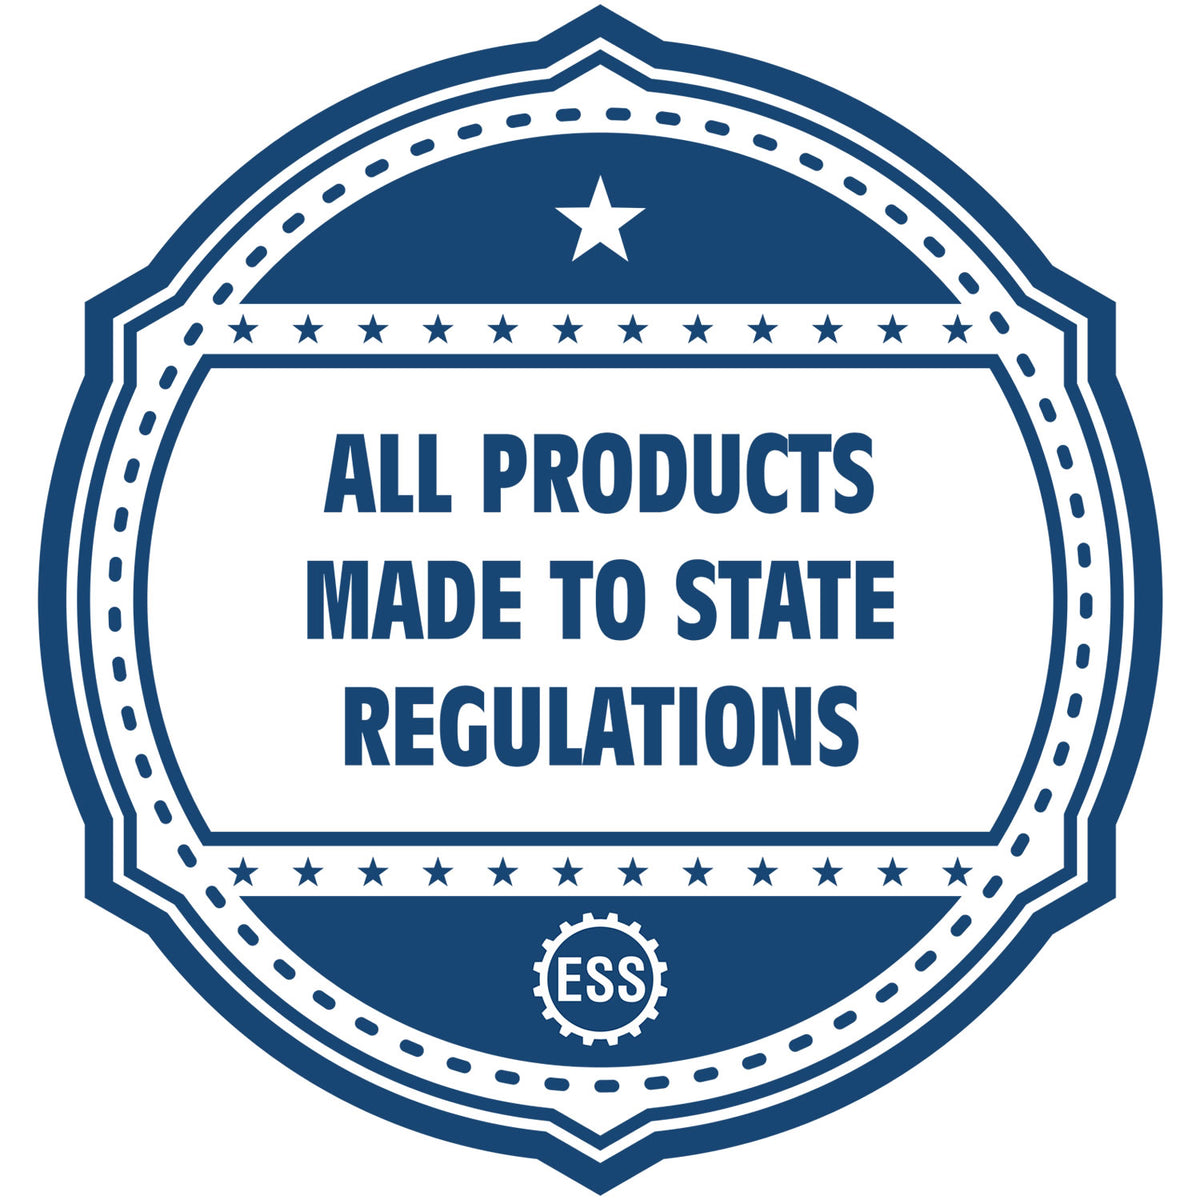 An icon or badge element for the Premium MaxLight Pre-Inked Texas Landscape Architectural Stamp showing that this product is made in compliance with state regulations.